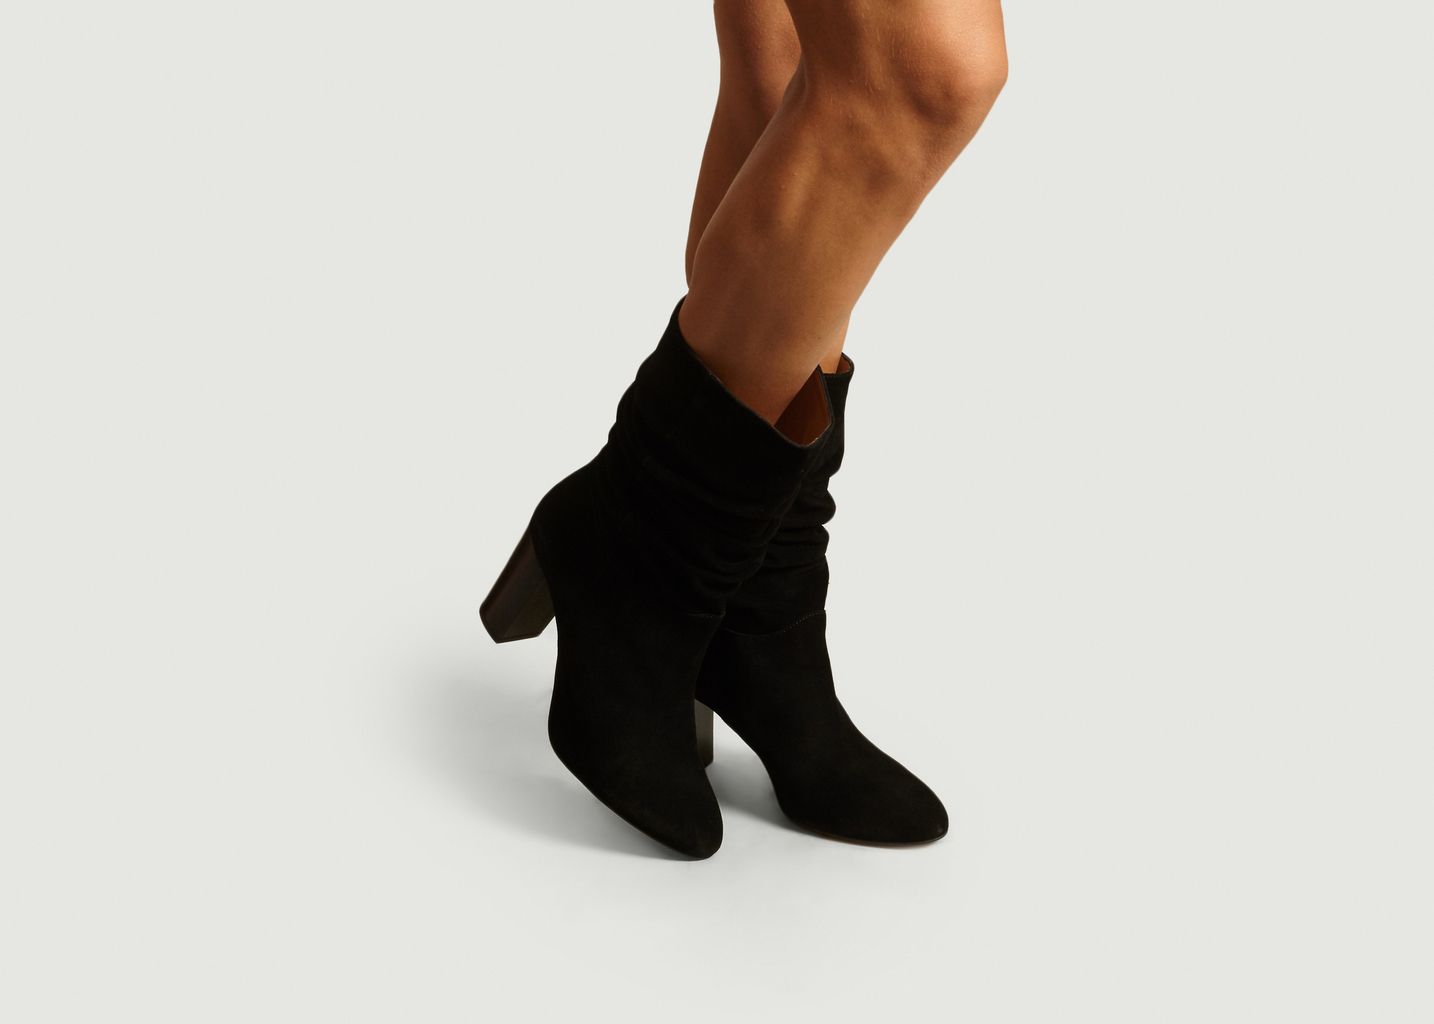 Blandine Suede Slouch Boots - Petite Mendigote